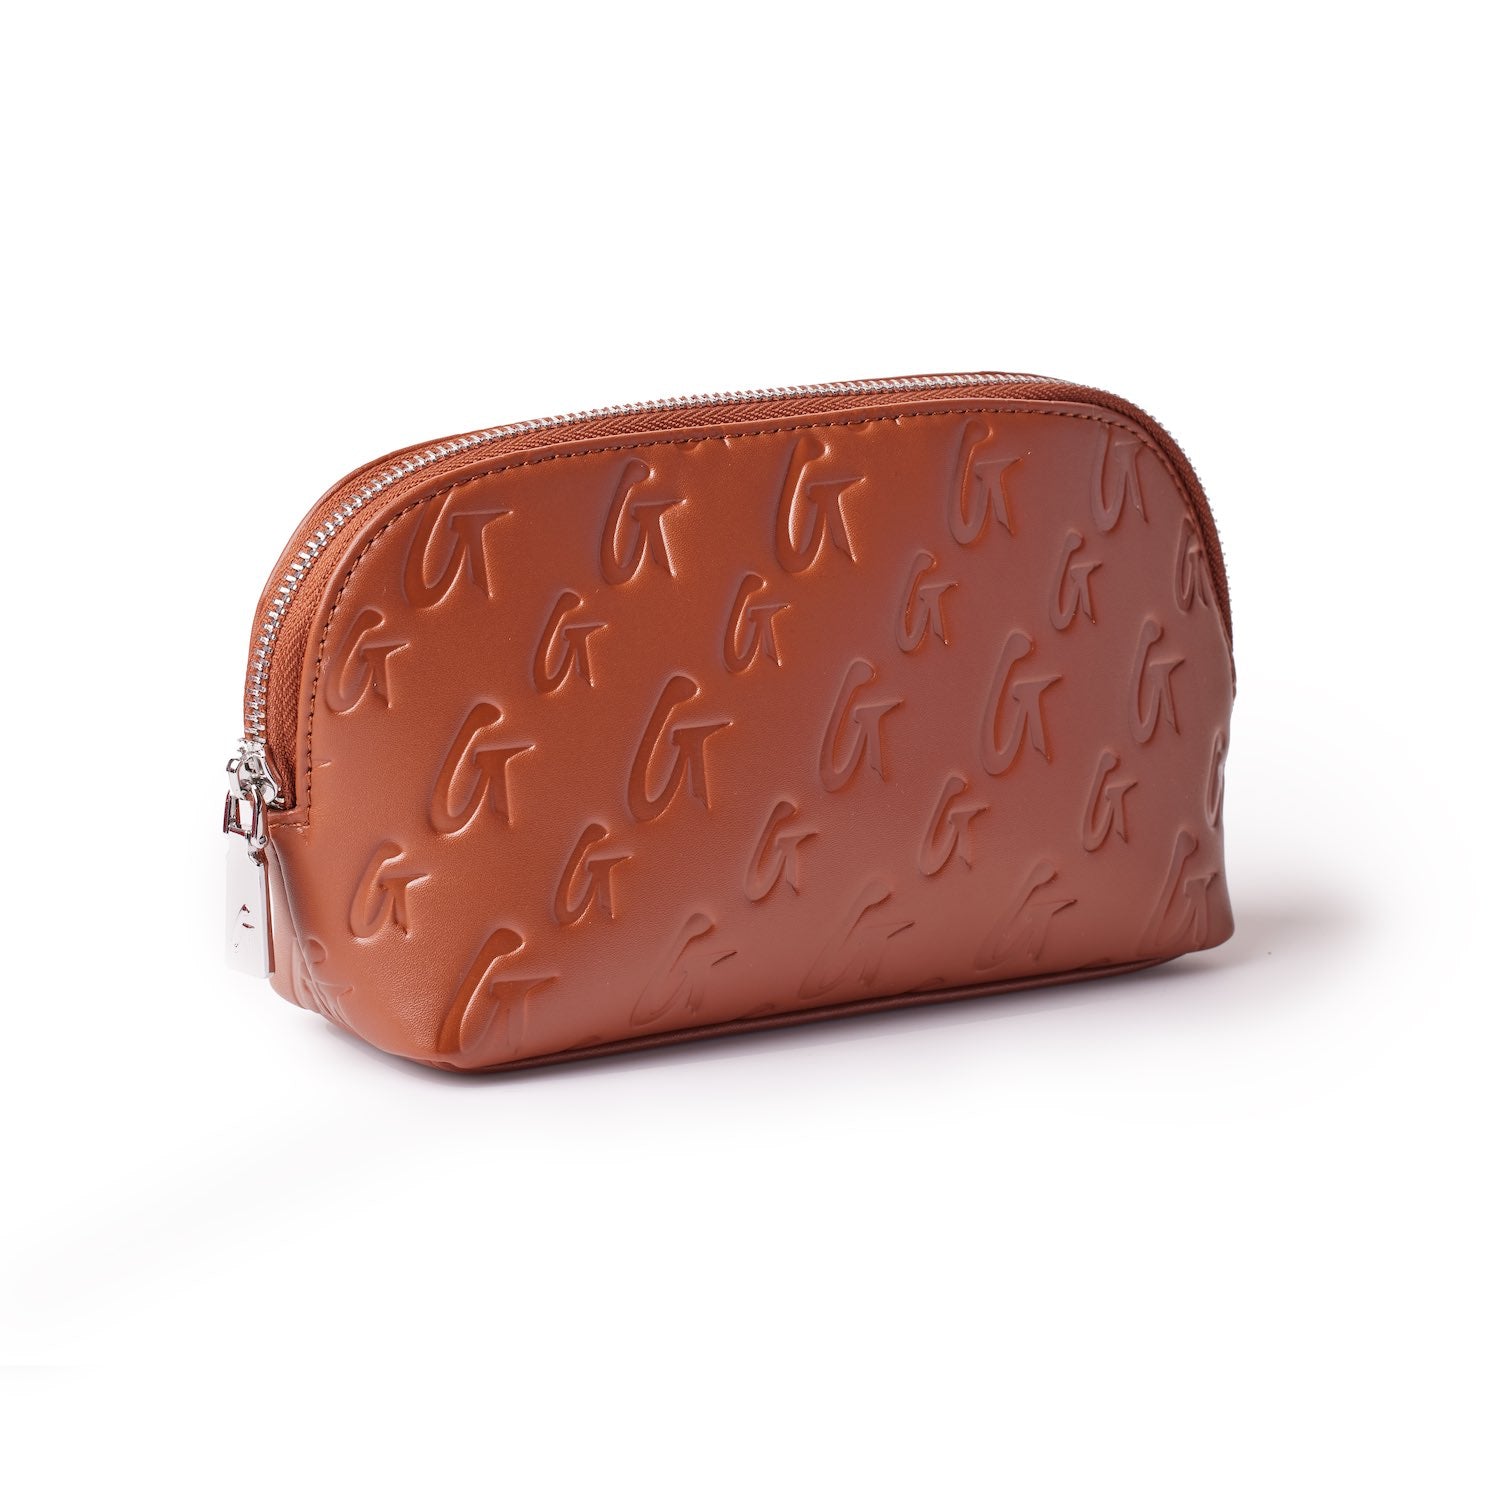 MONOGRAM COSMETIC POUCH BROWN